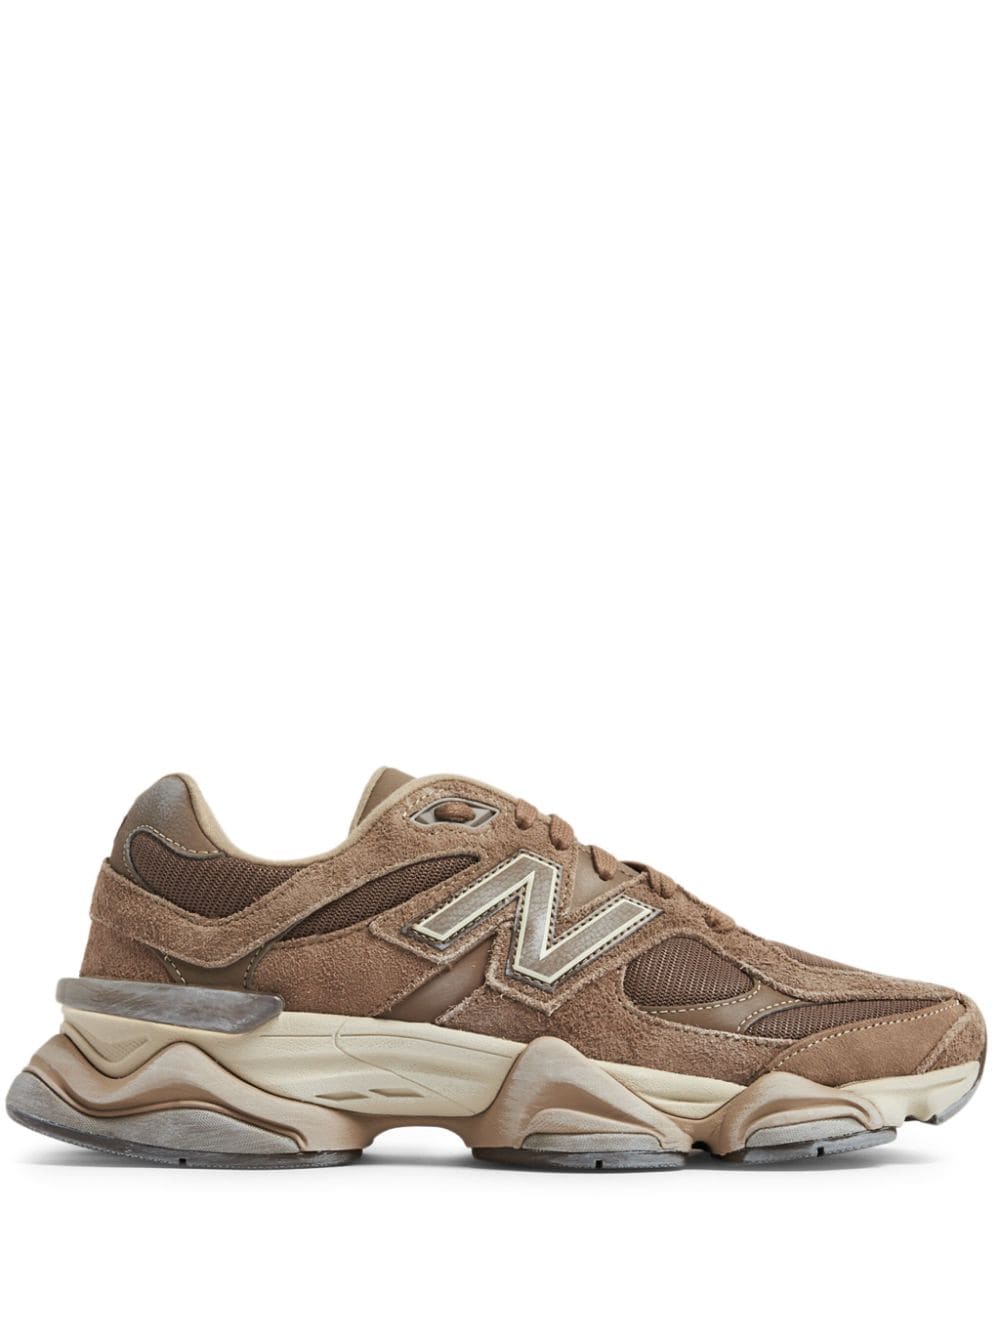 New Balance 9060 suede sneakers - Brown